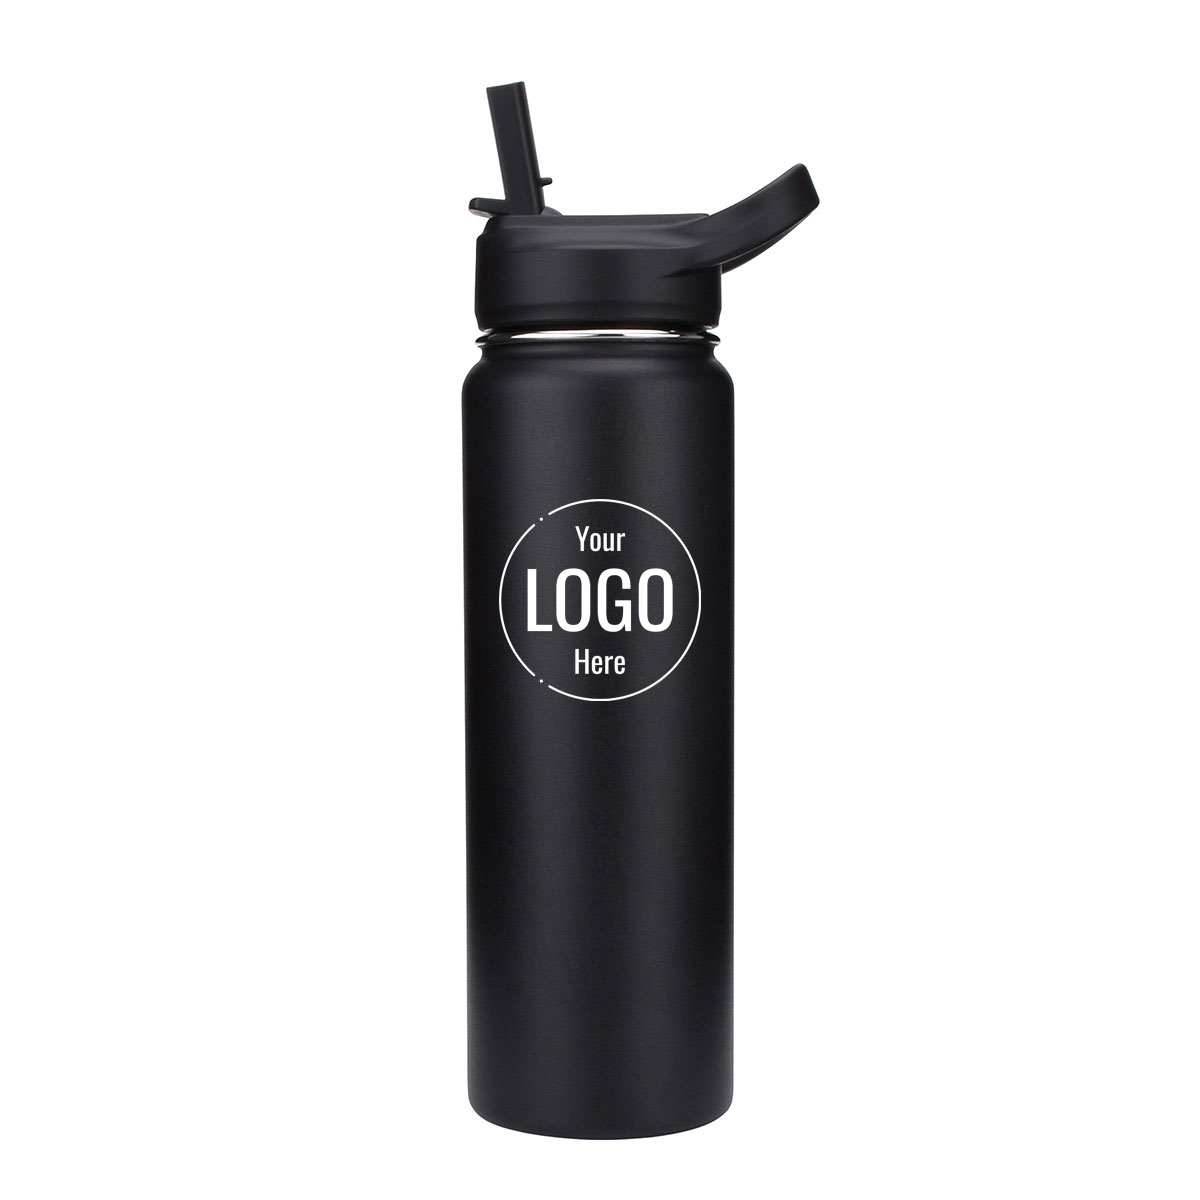 How to Clean a Hydro Flask Water Bottle